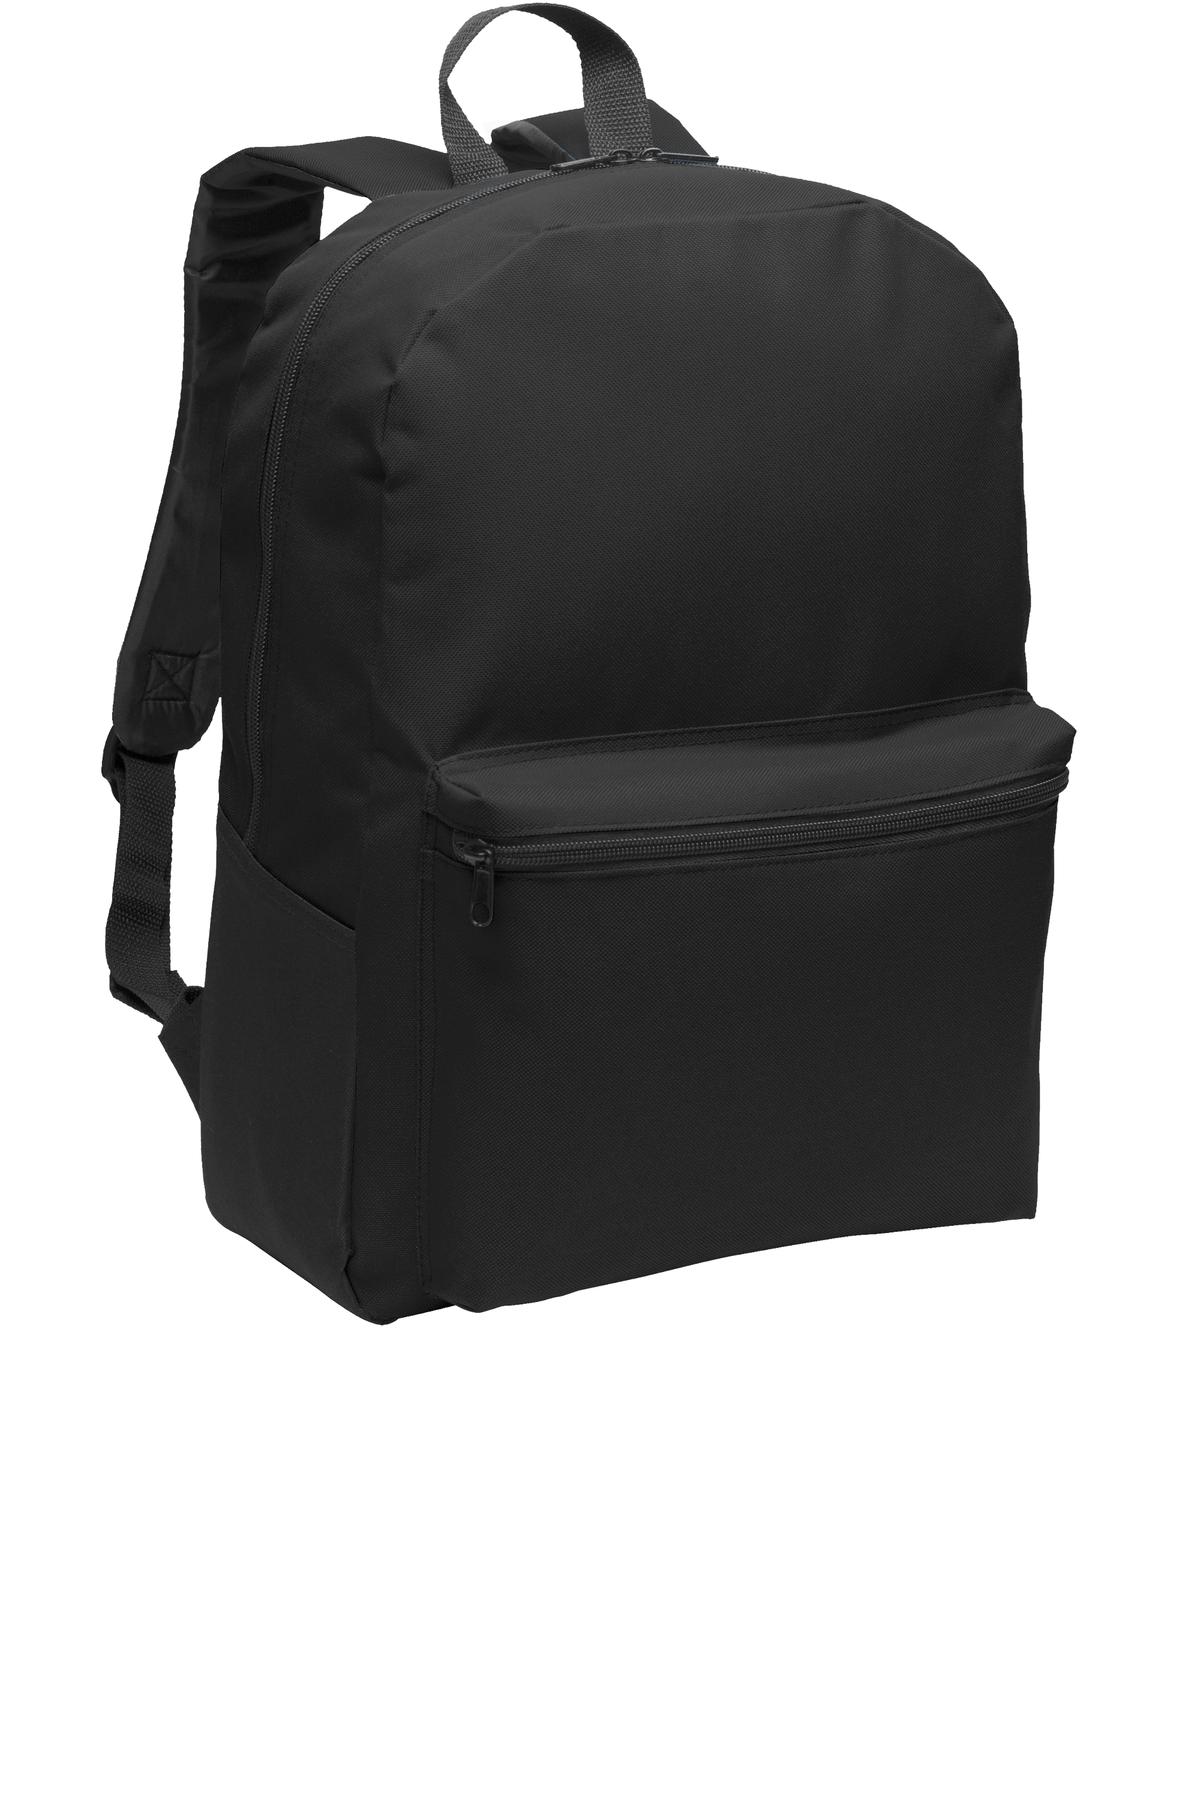 Port Authority Value Backpack-